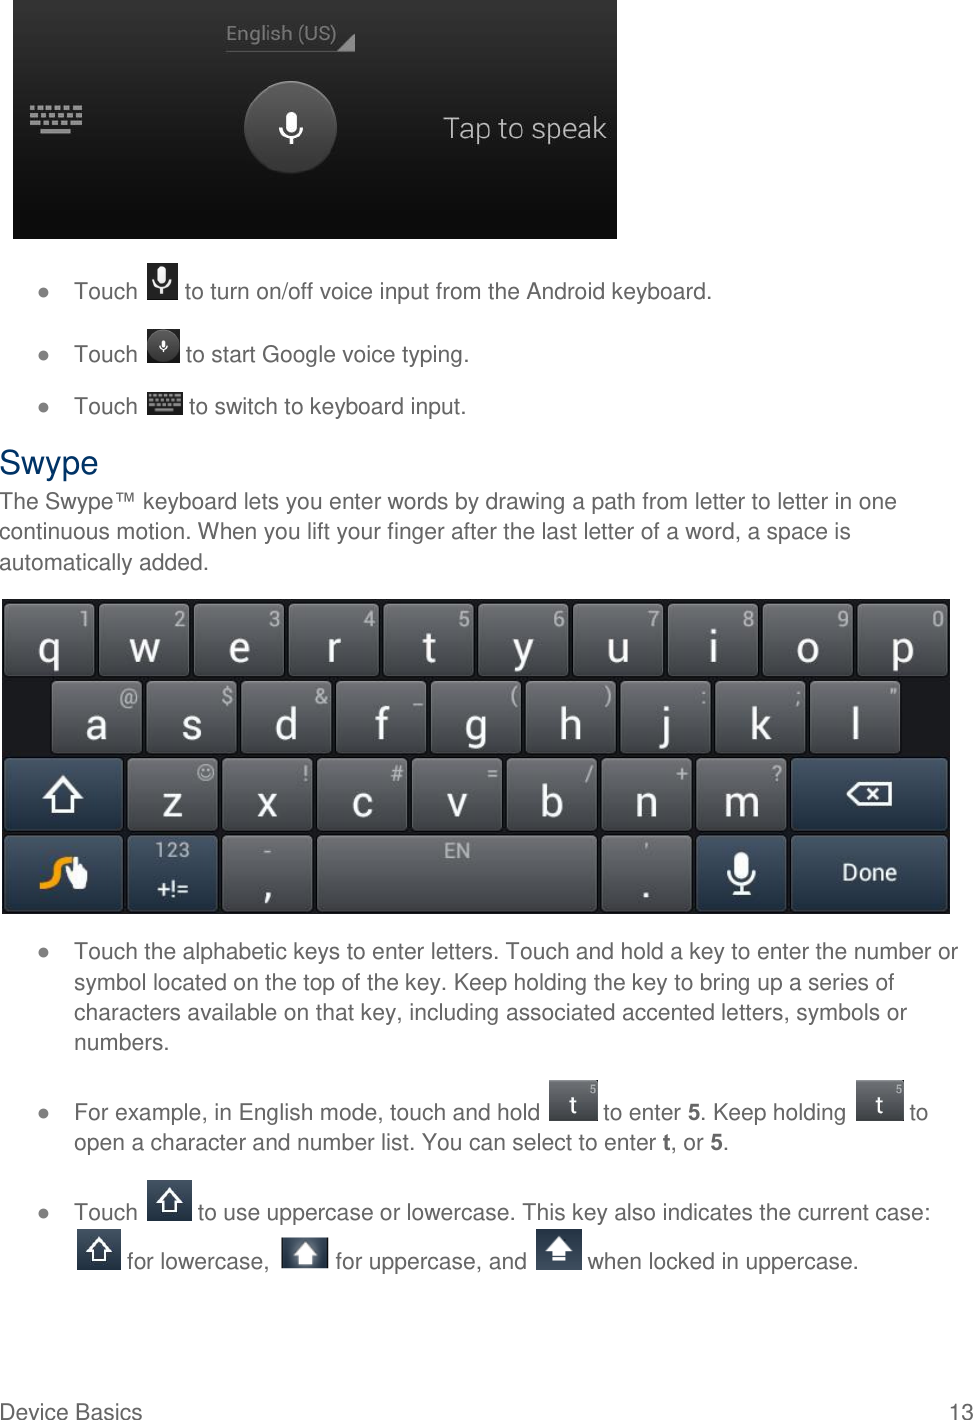  Device Basics  13  ● Touch   to turn on/off voice input from the Android keyboard. ● Touch   to start Google voice typing. ● Touch   to switch to keyboard input. Swype The Swype™ keyboard lets you enter words by drawing a path from letter to letter in one continuous motion. When you lift your finger after the last letter of a word, a space is automatically added.  ● Touch the alphabetic keys to enter letters. Touch and hold a key to enter the number or symbol located on the top of the key. Keep holding the key to bring up a series of characters available on that key, including associated accented letters, symbols or numbers.  ● For example, in English mode, touch and hold   to enter 5. Keep holding   to open a character and number list. You can select to enter t, or 5. ● Touch   to use uppercase or lowercase. This key also indicates the current case:  for lowercase,   for uppercase, and   when locked in uppercase. 